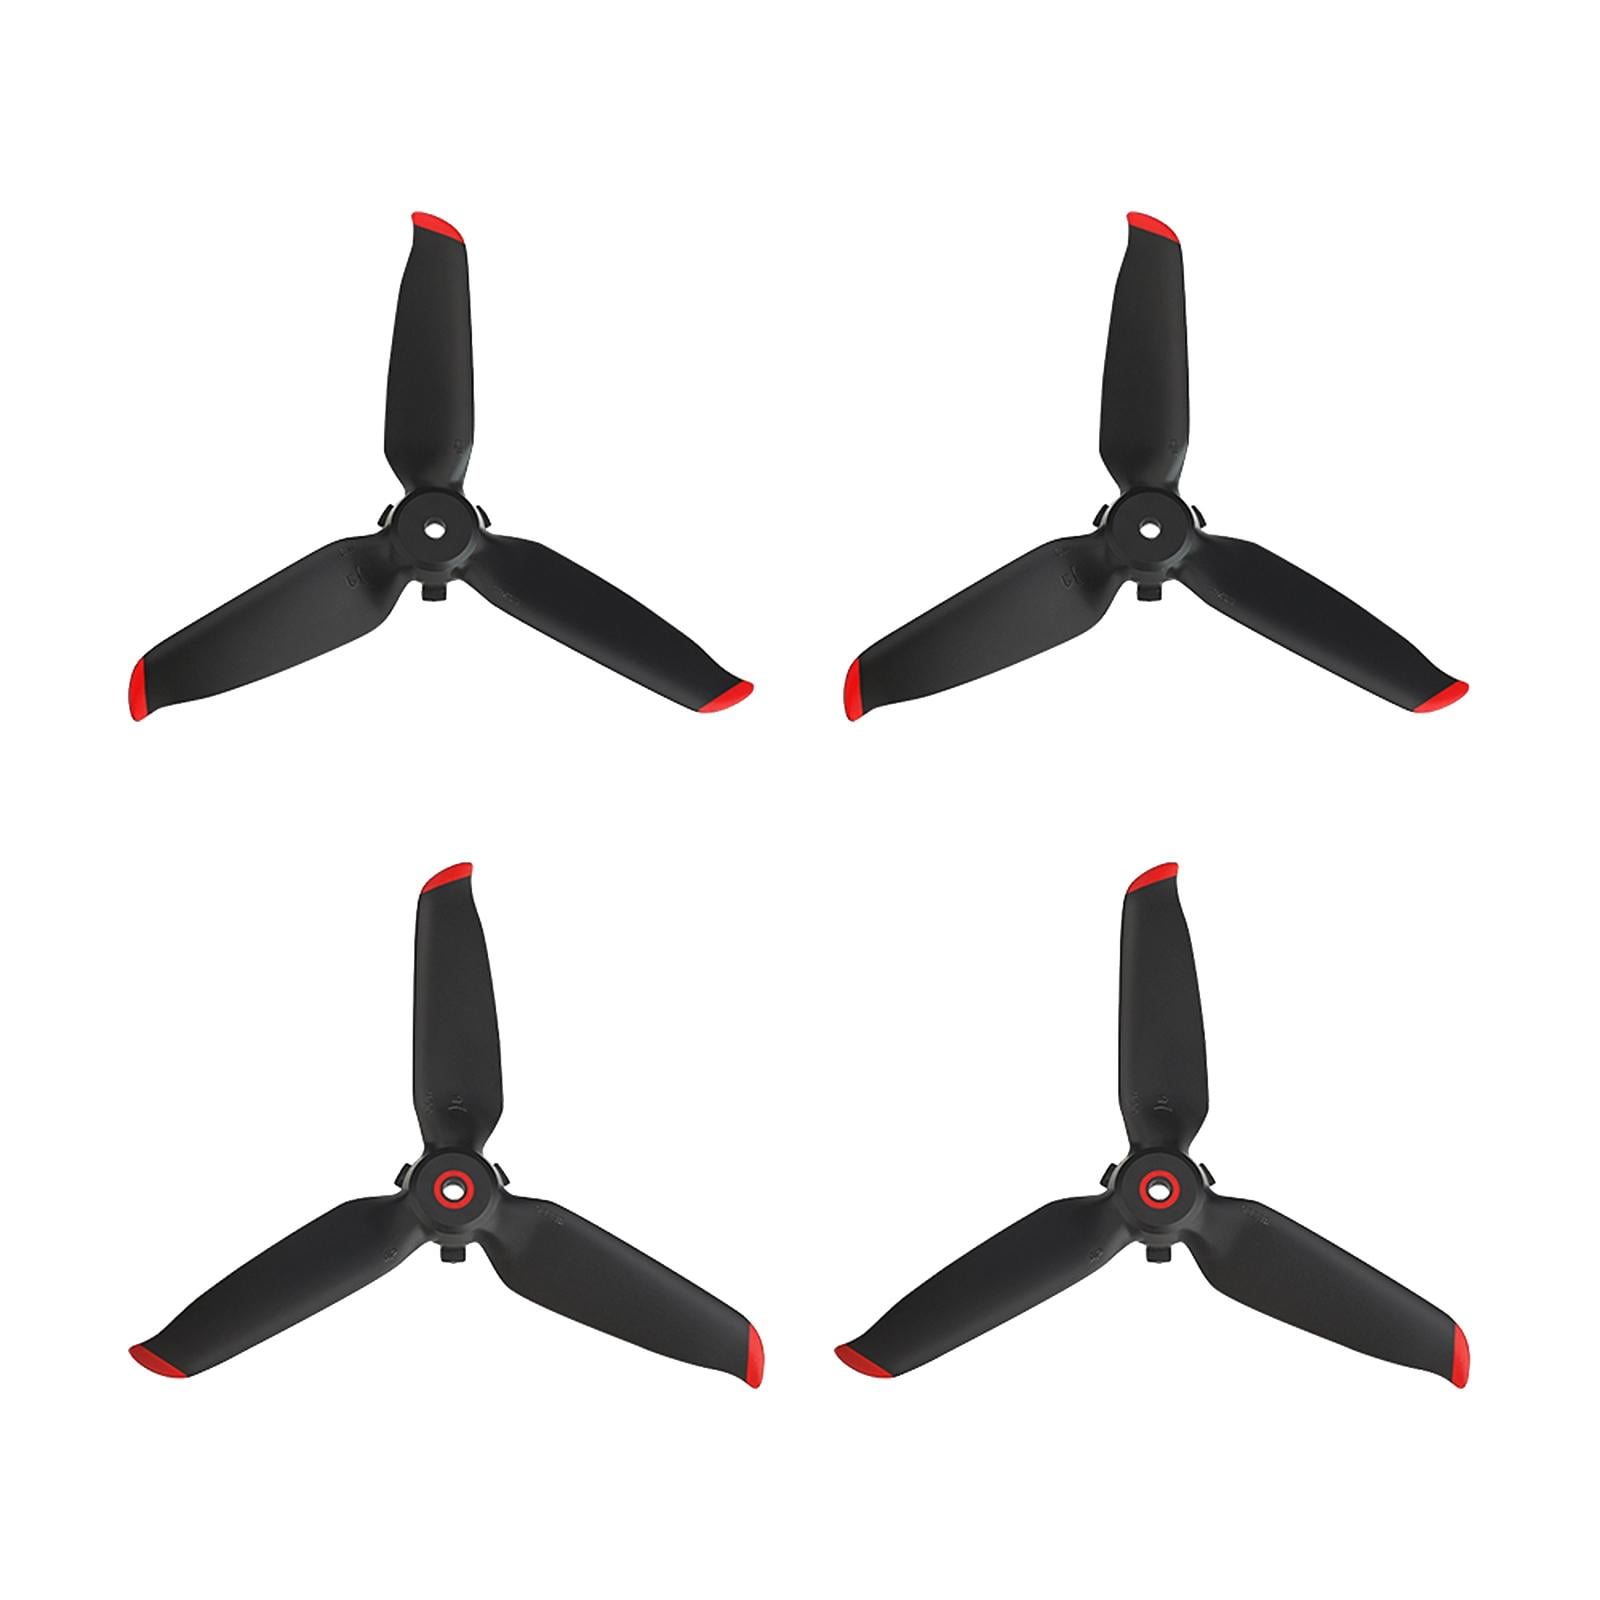 1 pairs Rc boat blades paddle 3 blades nylon boat propeller positive & revers!w 